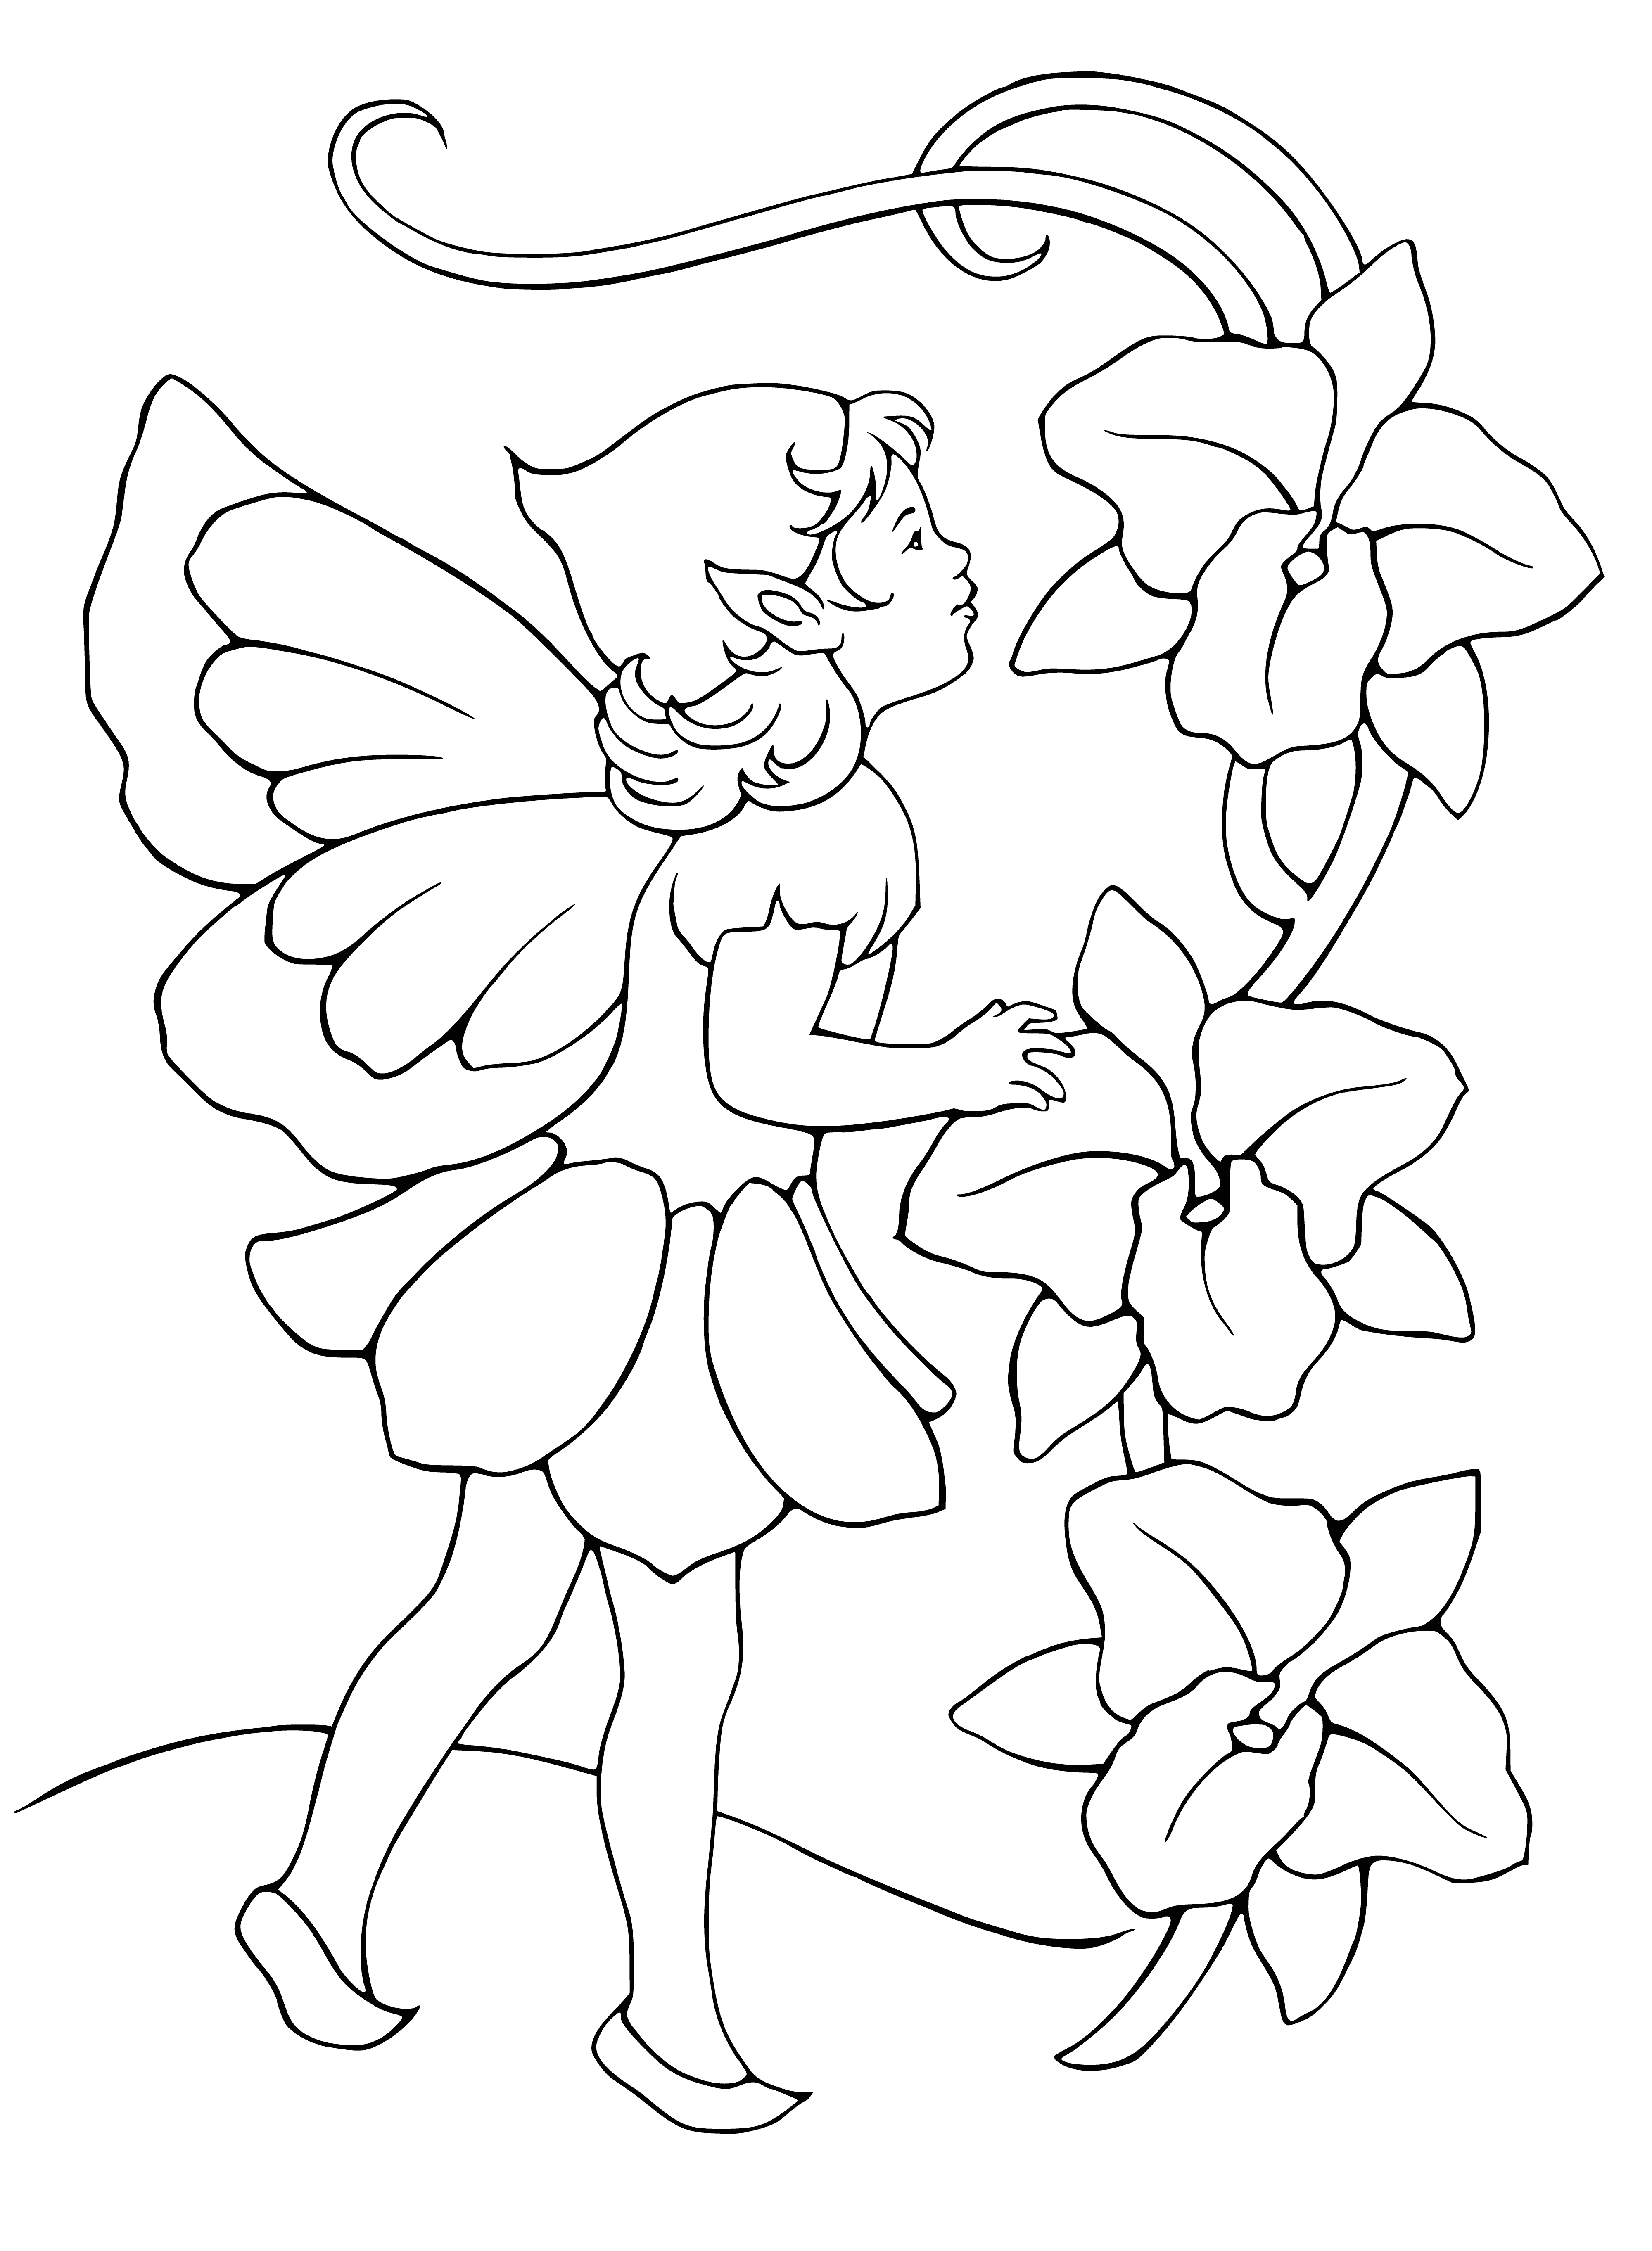 coloring page: Elf wearing green outfit, with pointy ears & bow/arrow on toadstool.